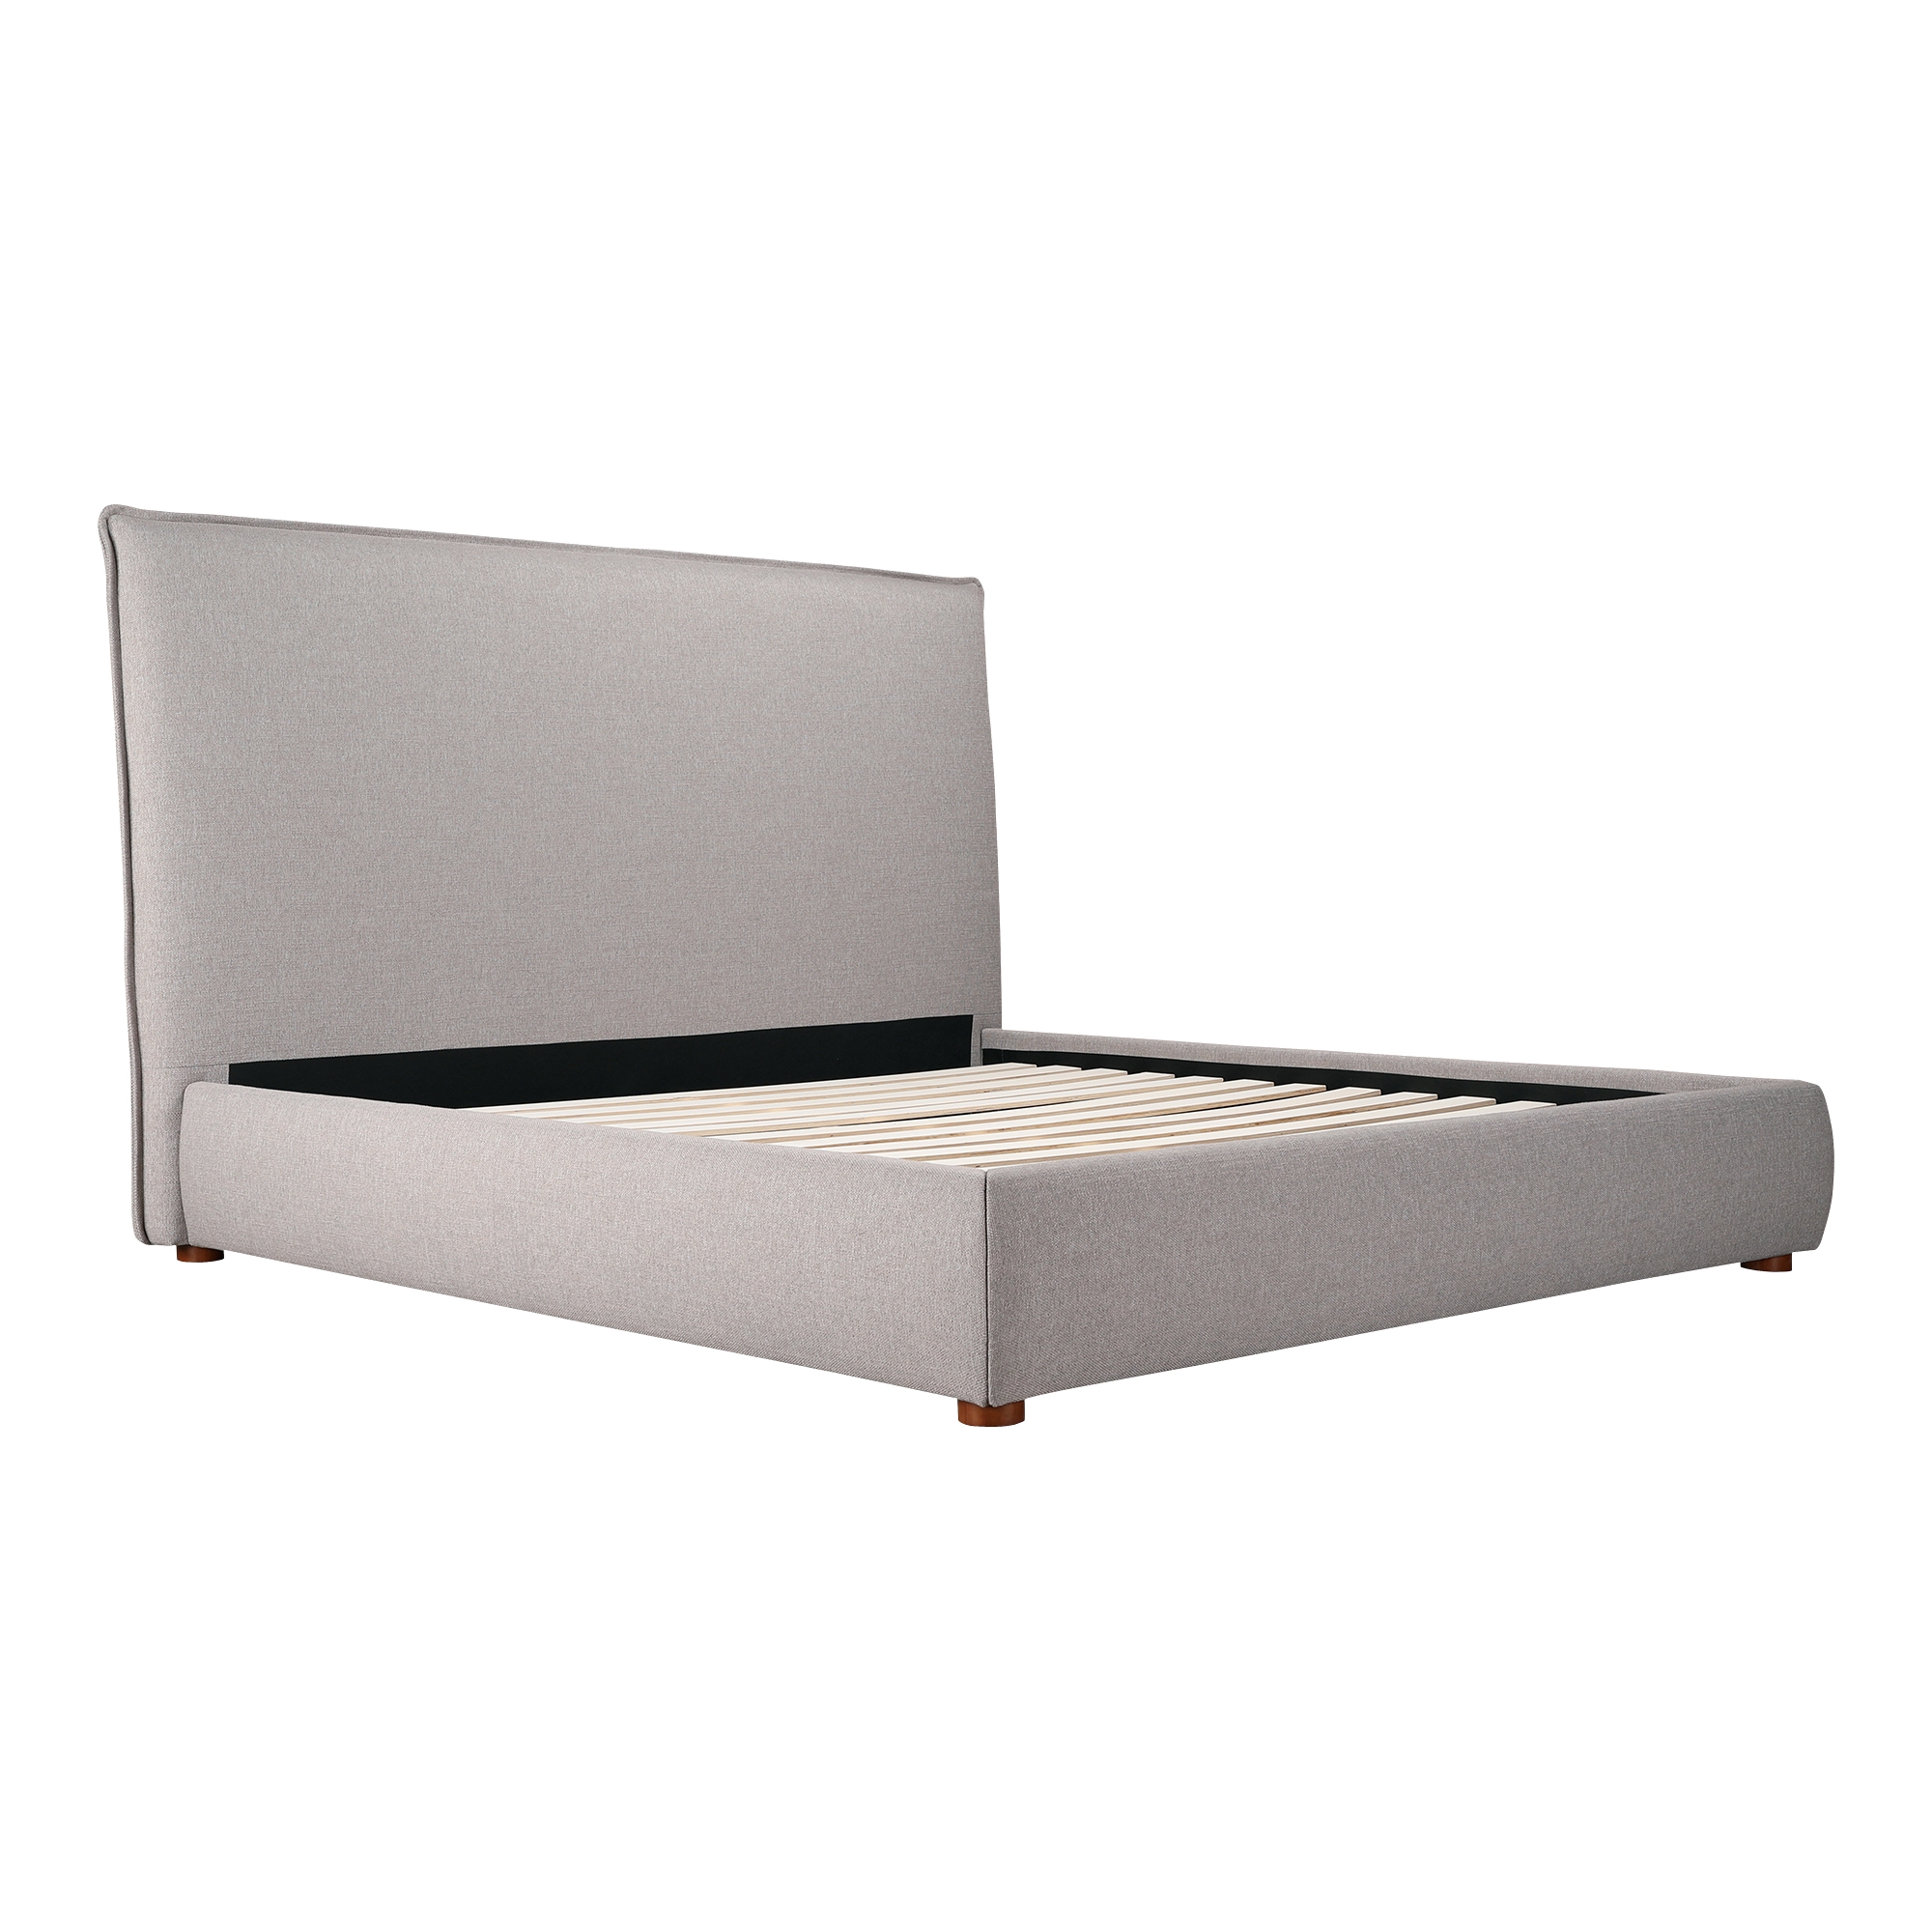 Luzon Queen Bed Tall Headboard Greystone - Image 2